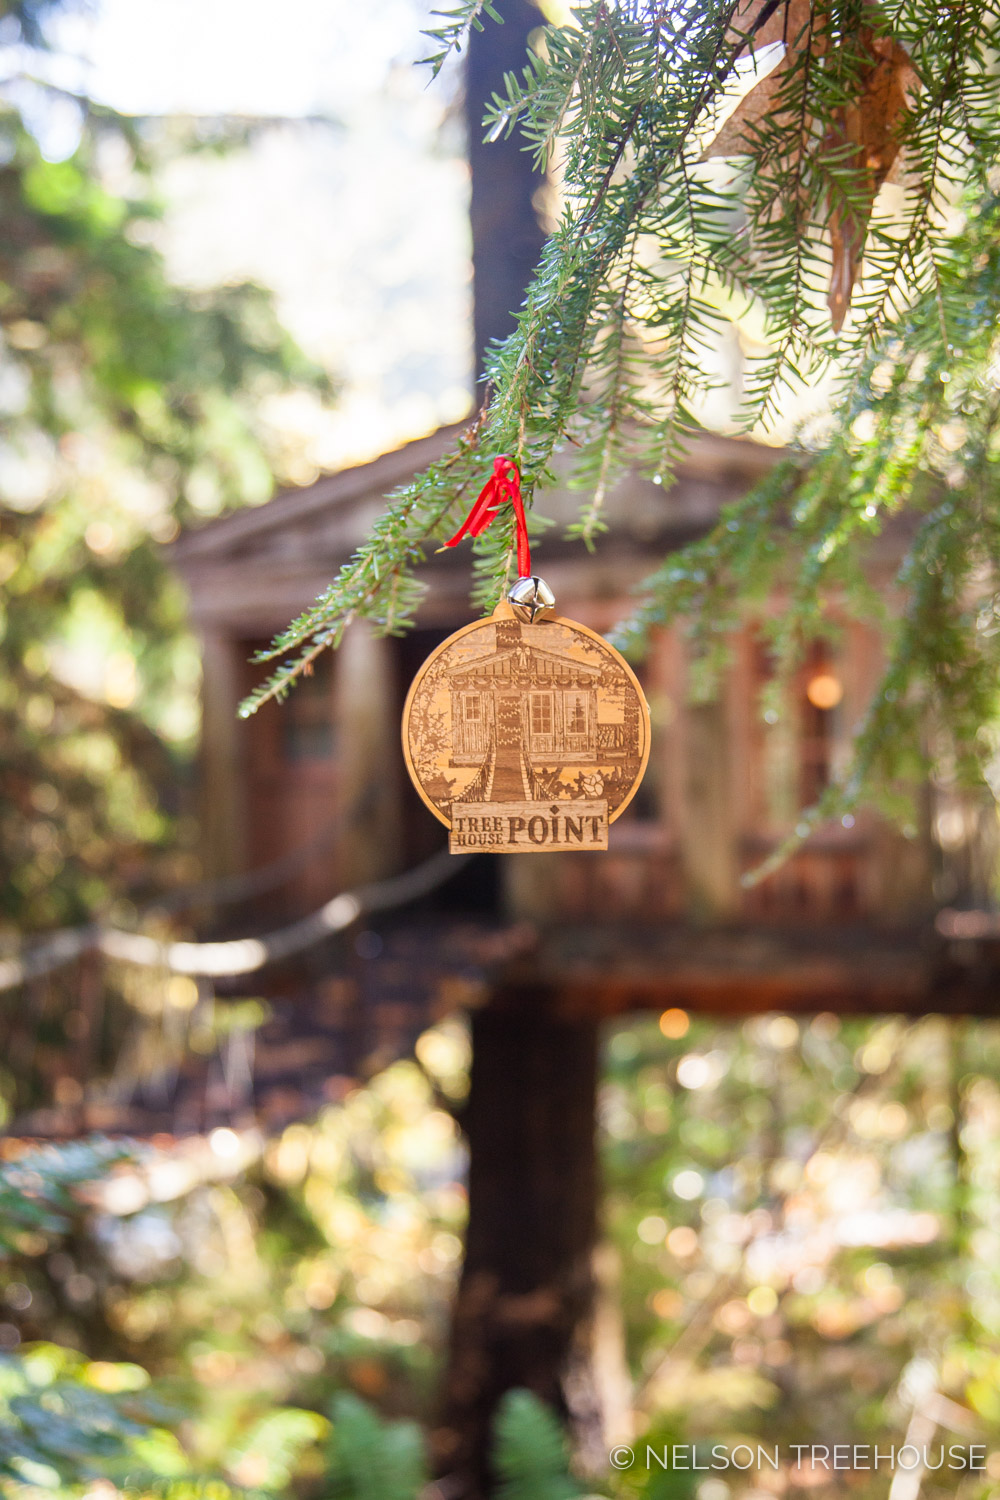  Temple of the Blue Moon Treehouse Point Ornament 